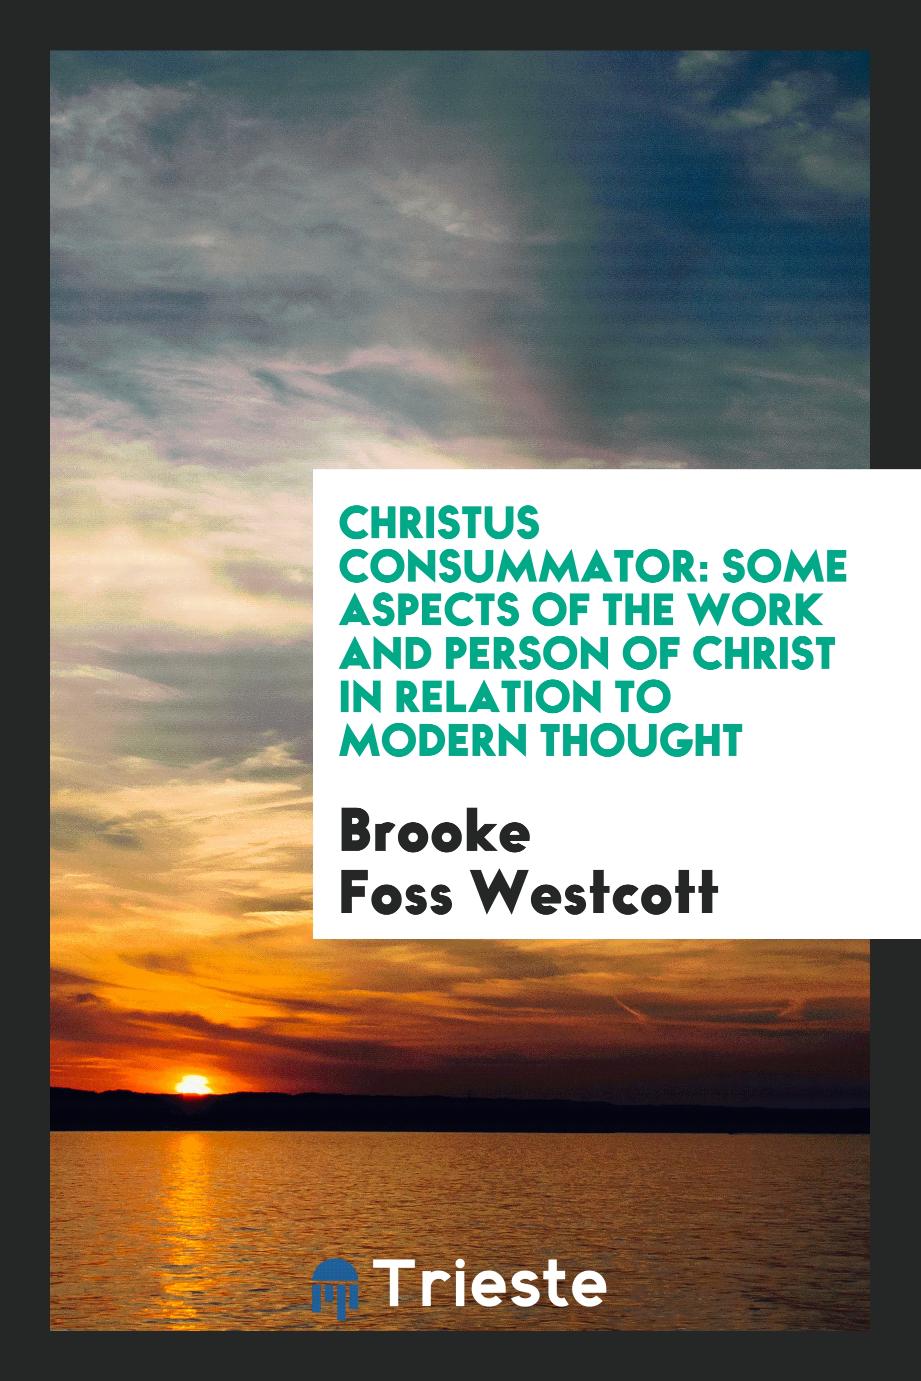 Christus Consummator: Some Aspects of the Work and Person of Christ in Relation to Modern Thought